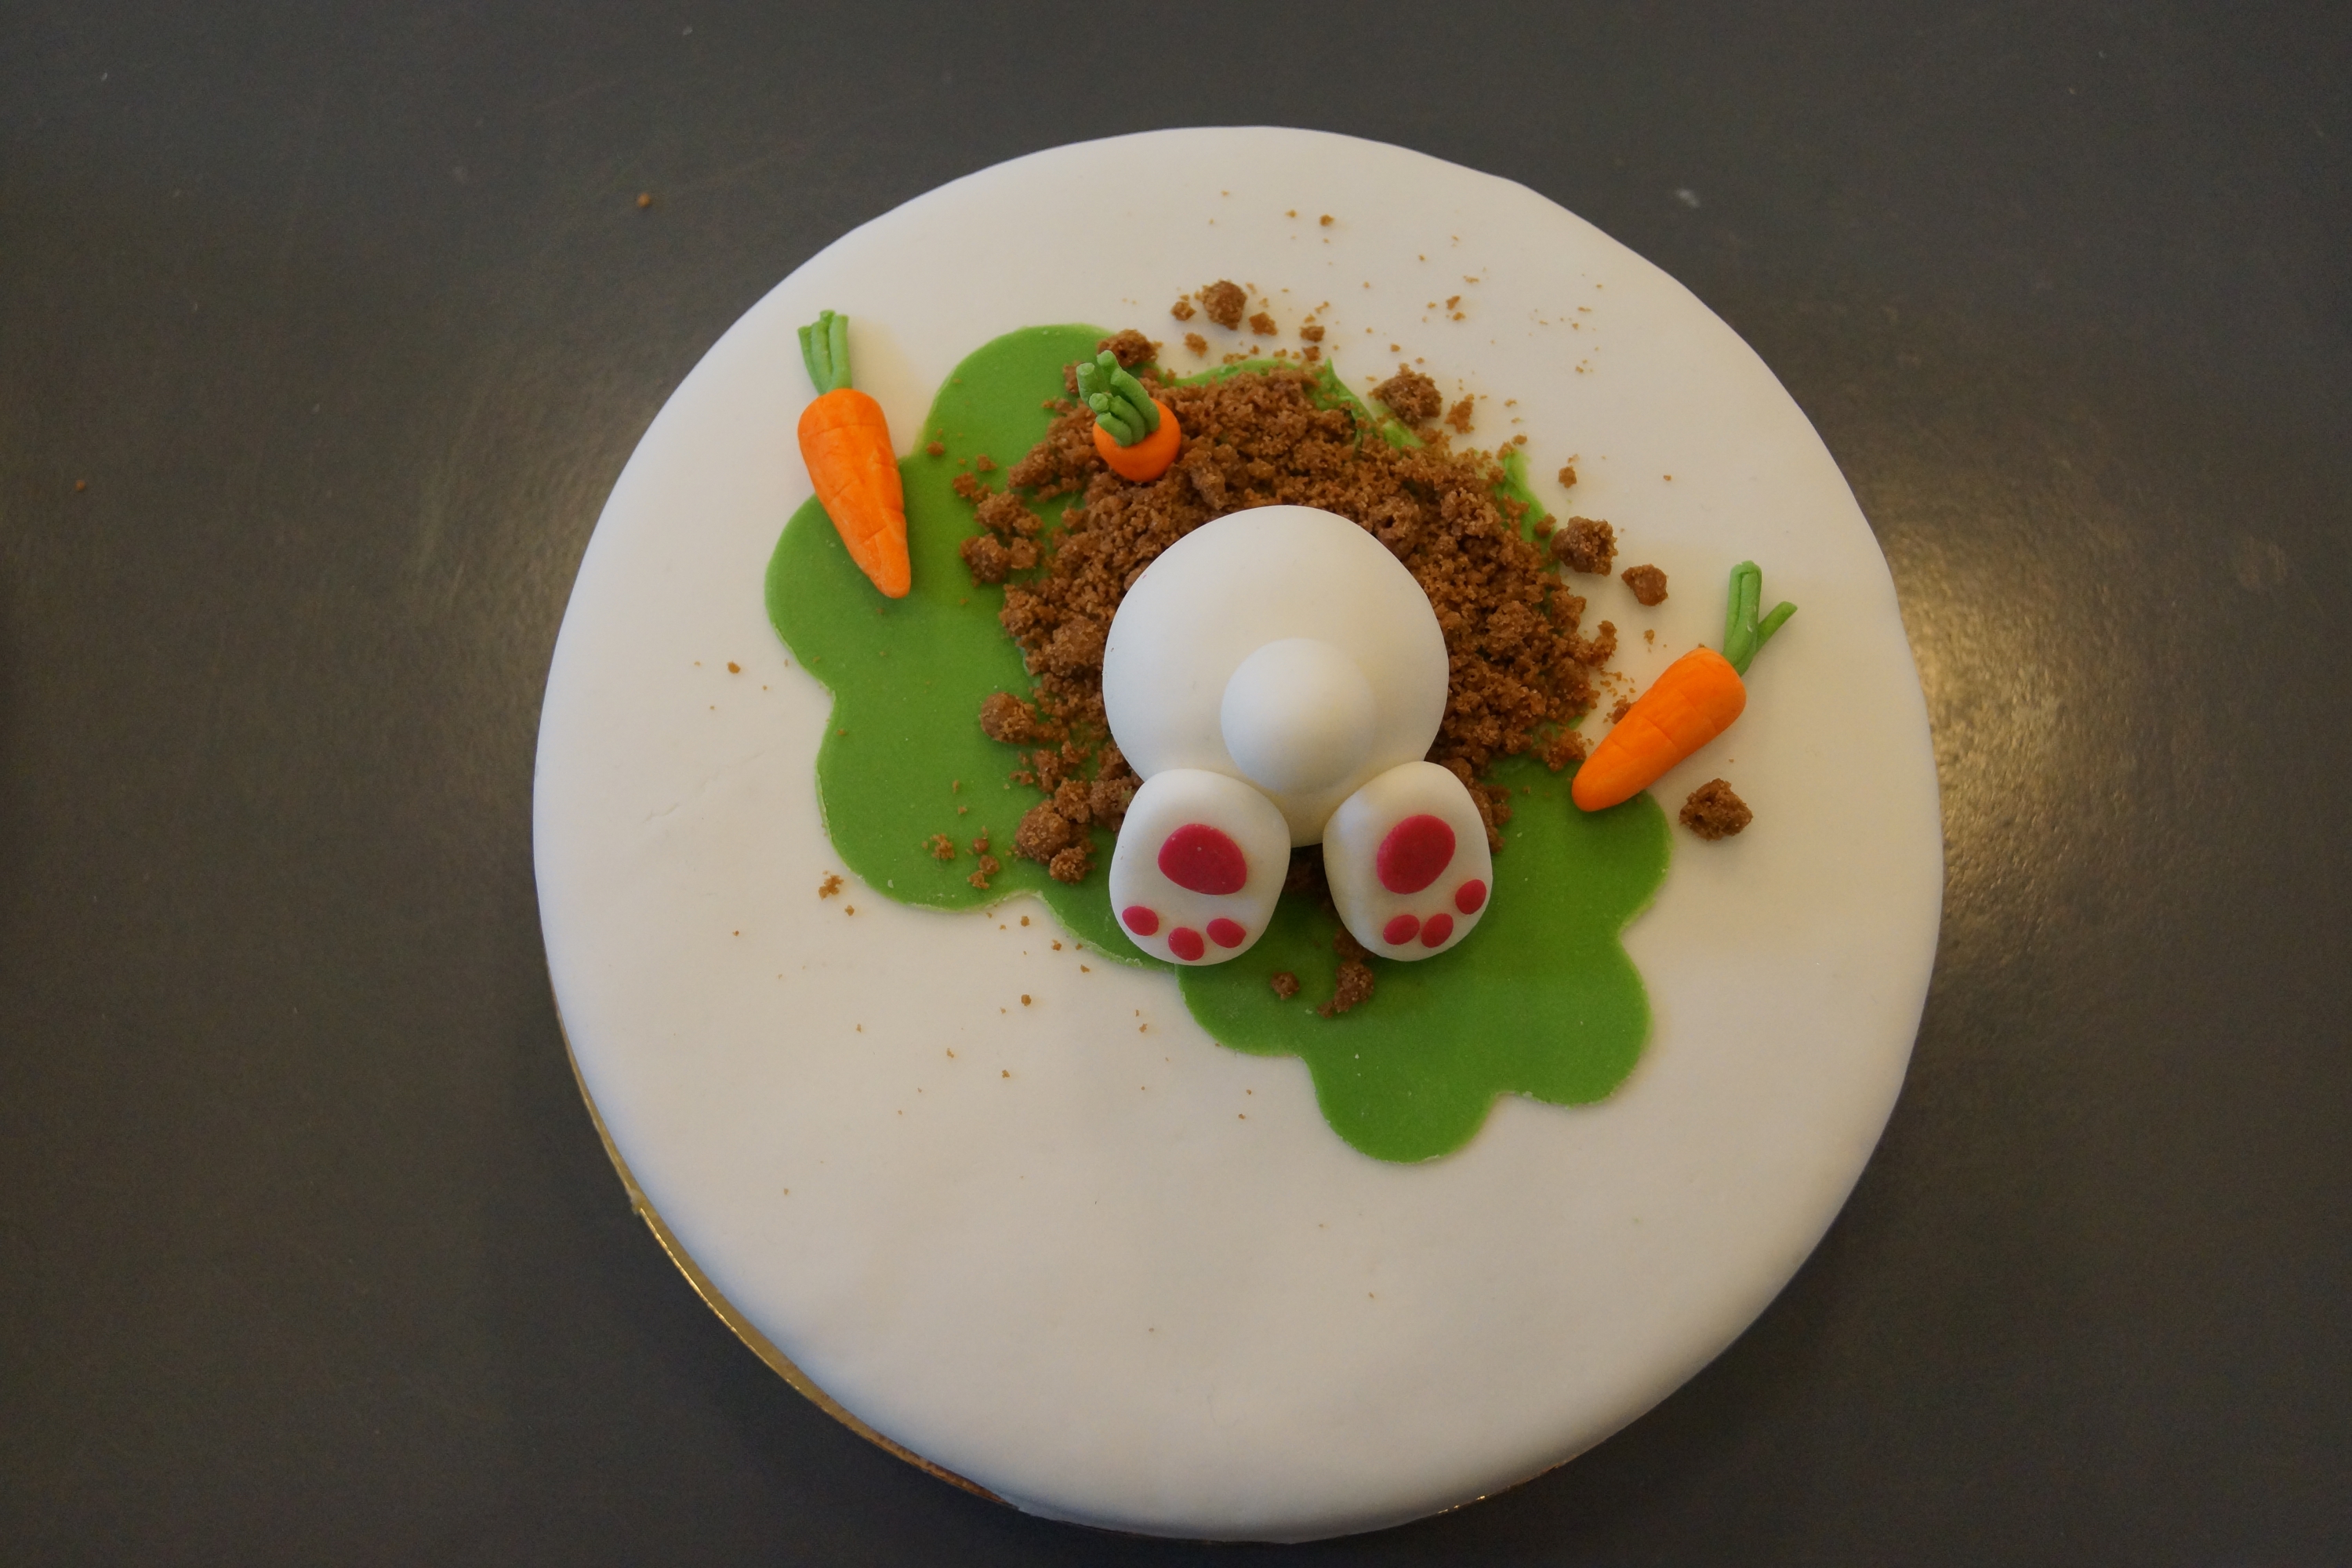 Easter bunny cake 2014 from above